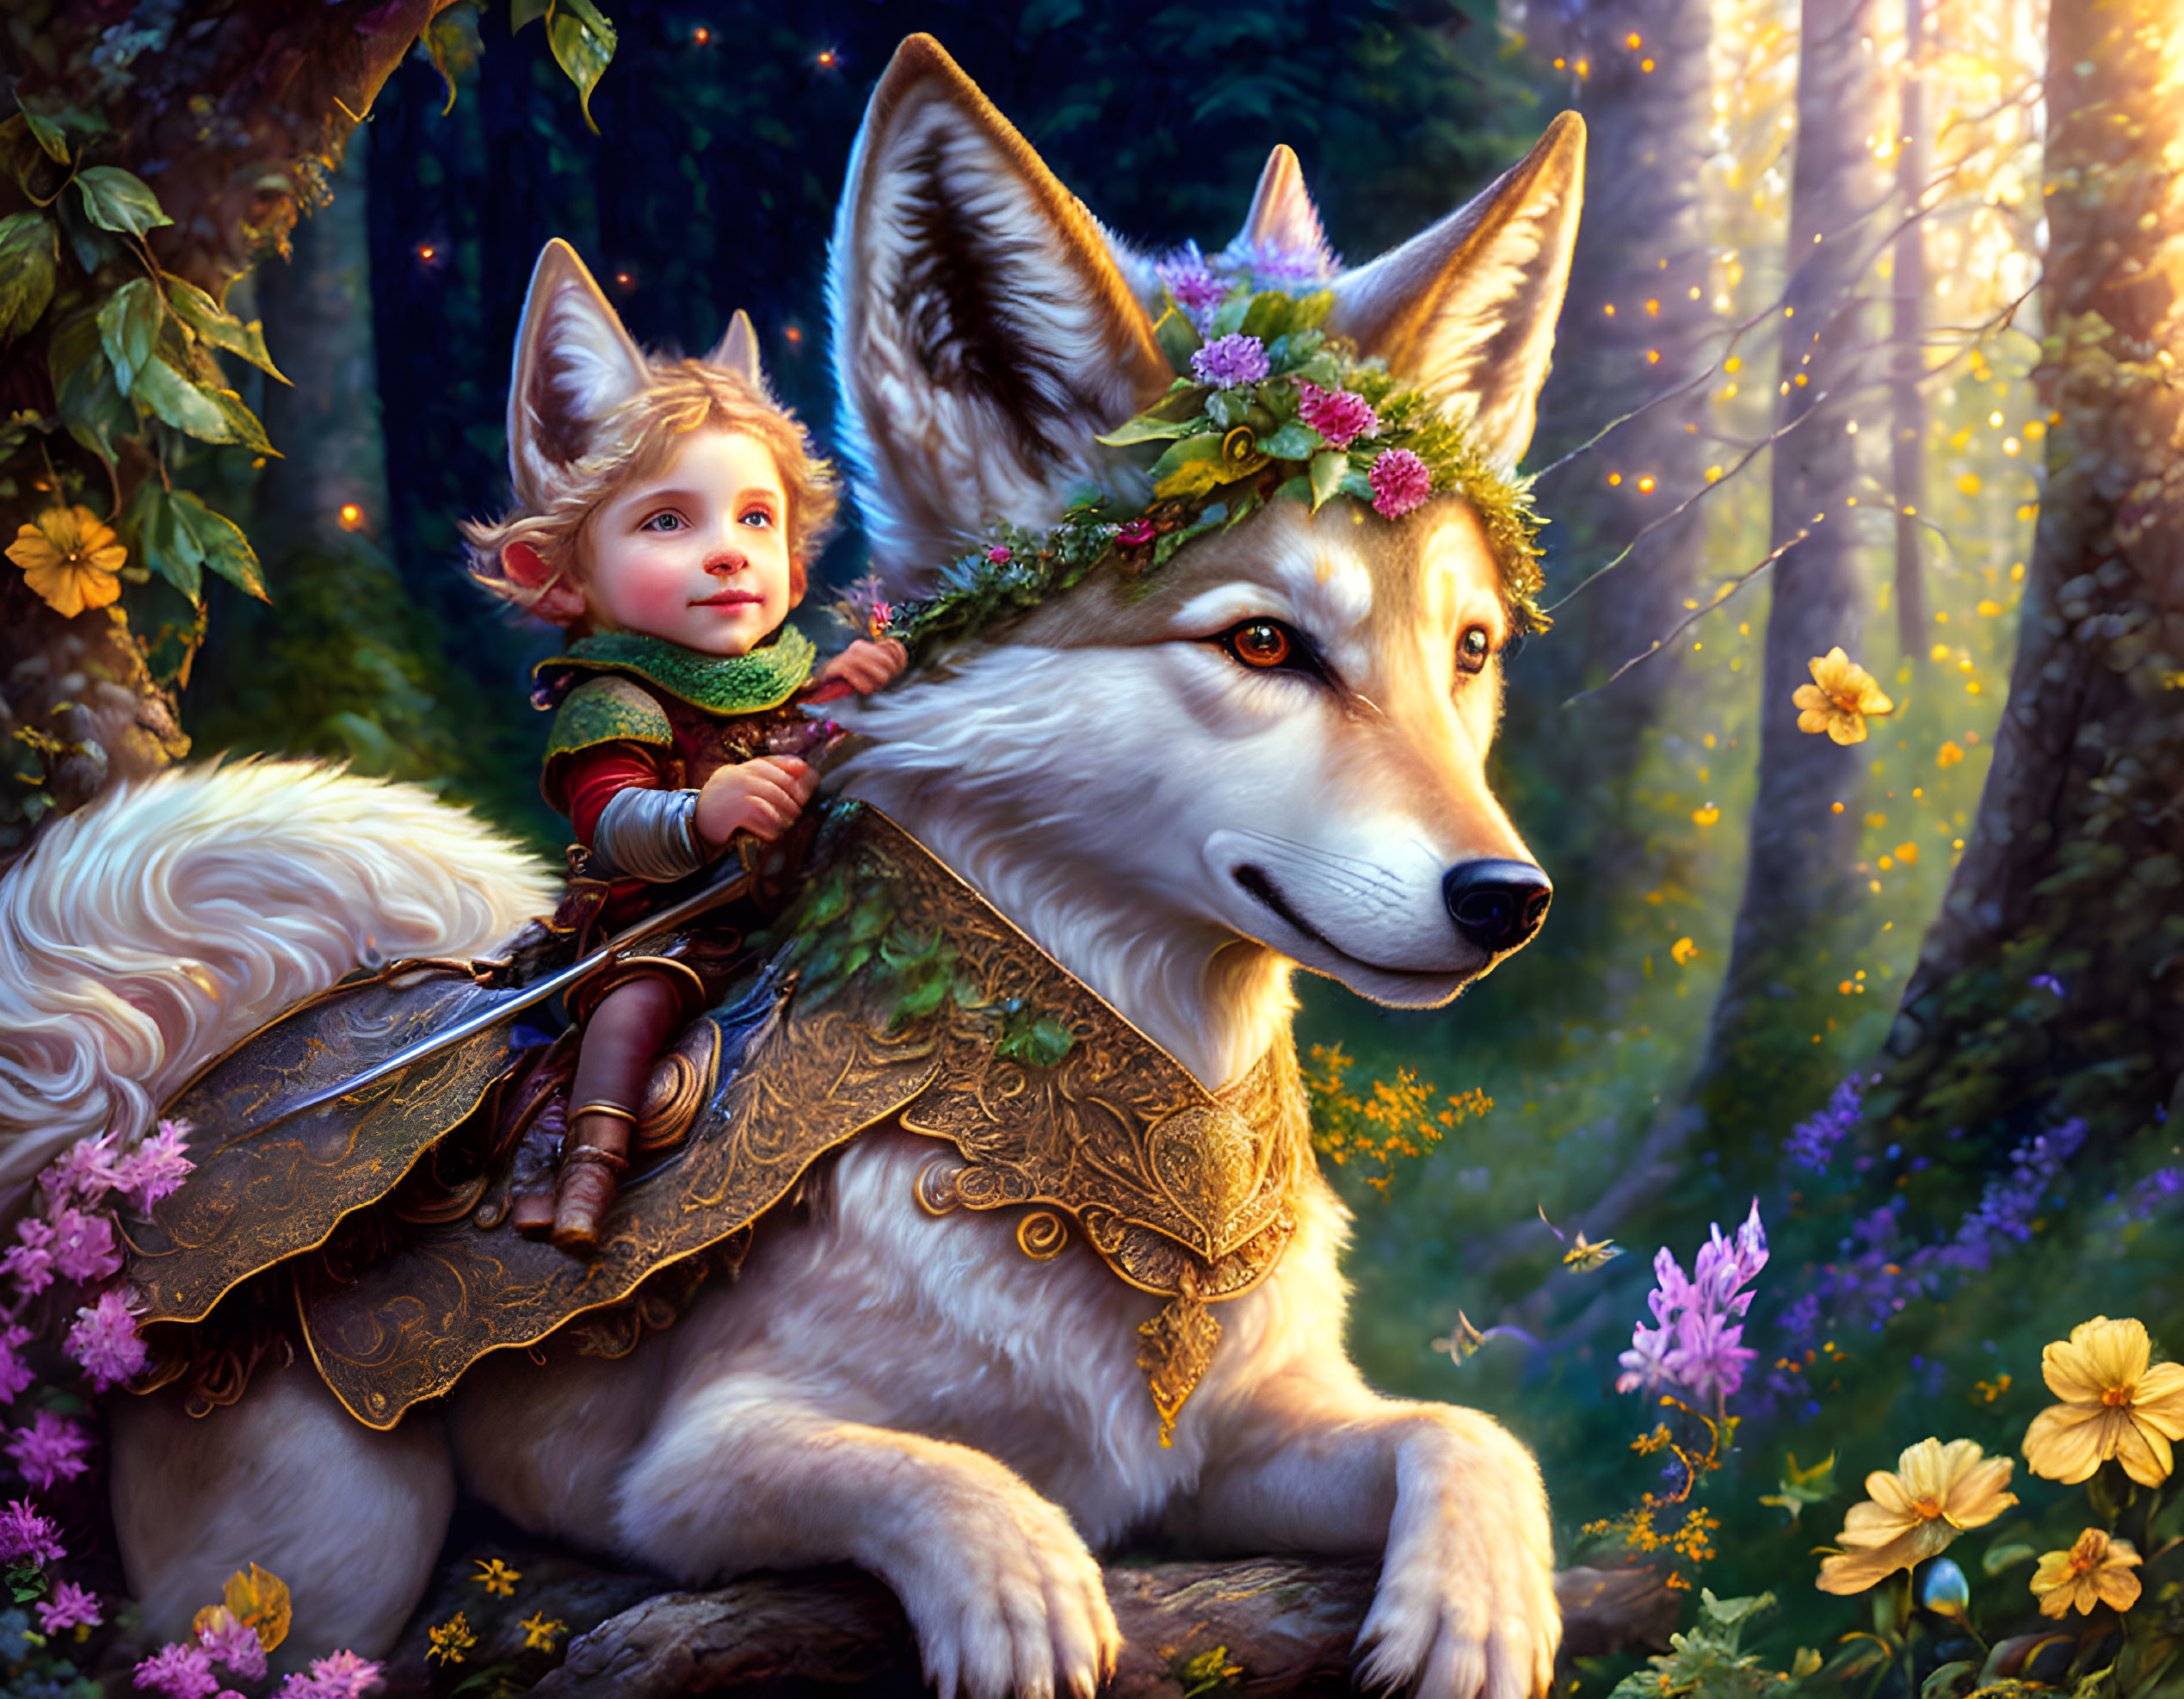 Child with elfin features rides majestic wolf in enchanted forest